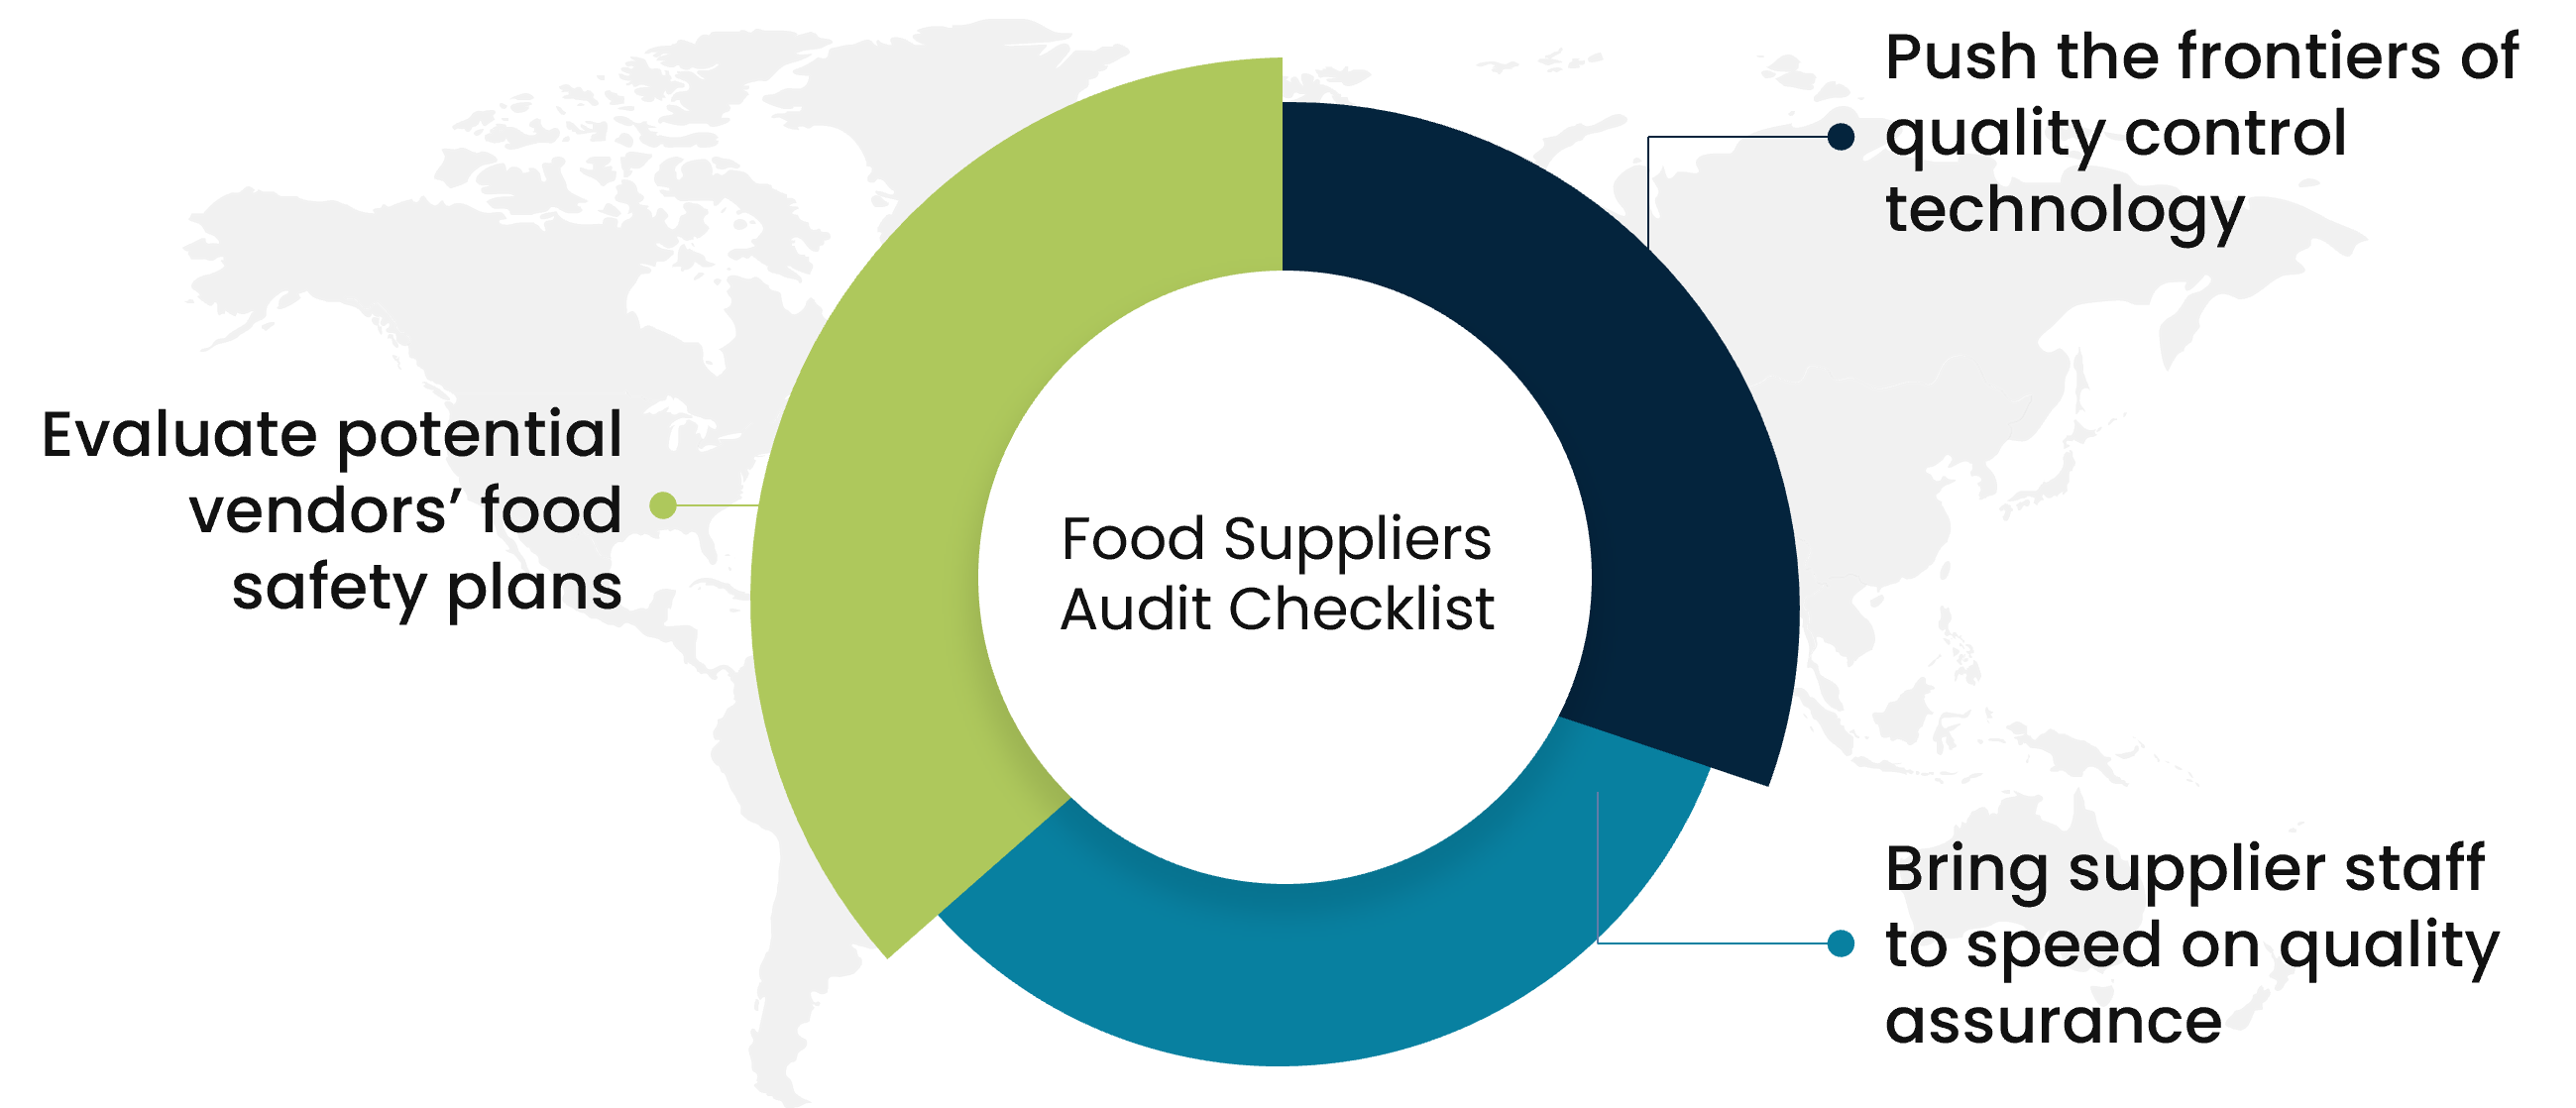 Food Quality Control in Food and Beverage industry | SpendEdge